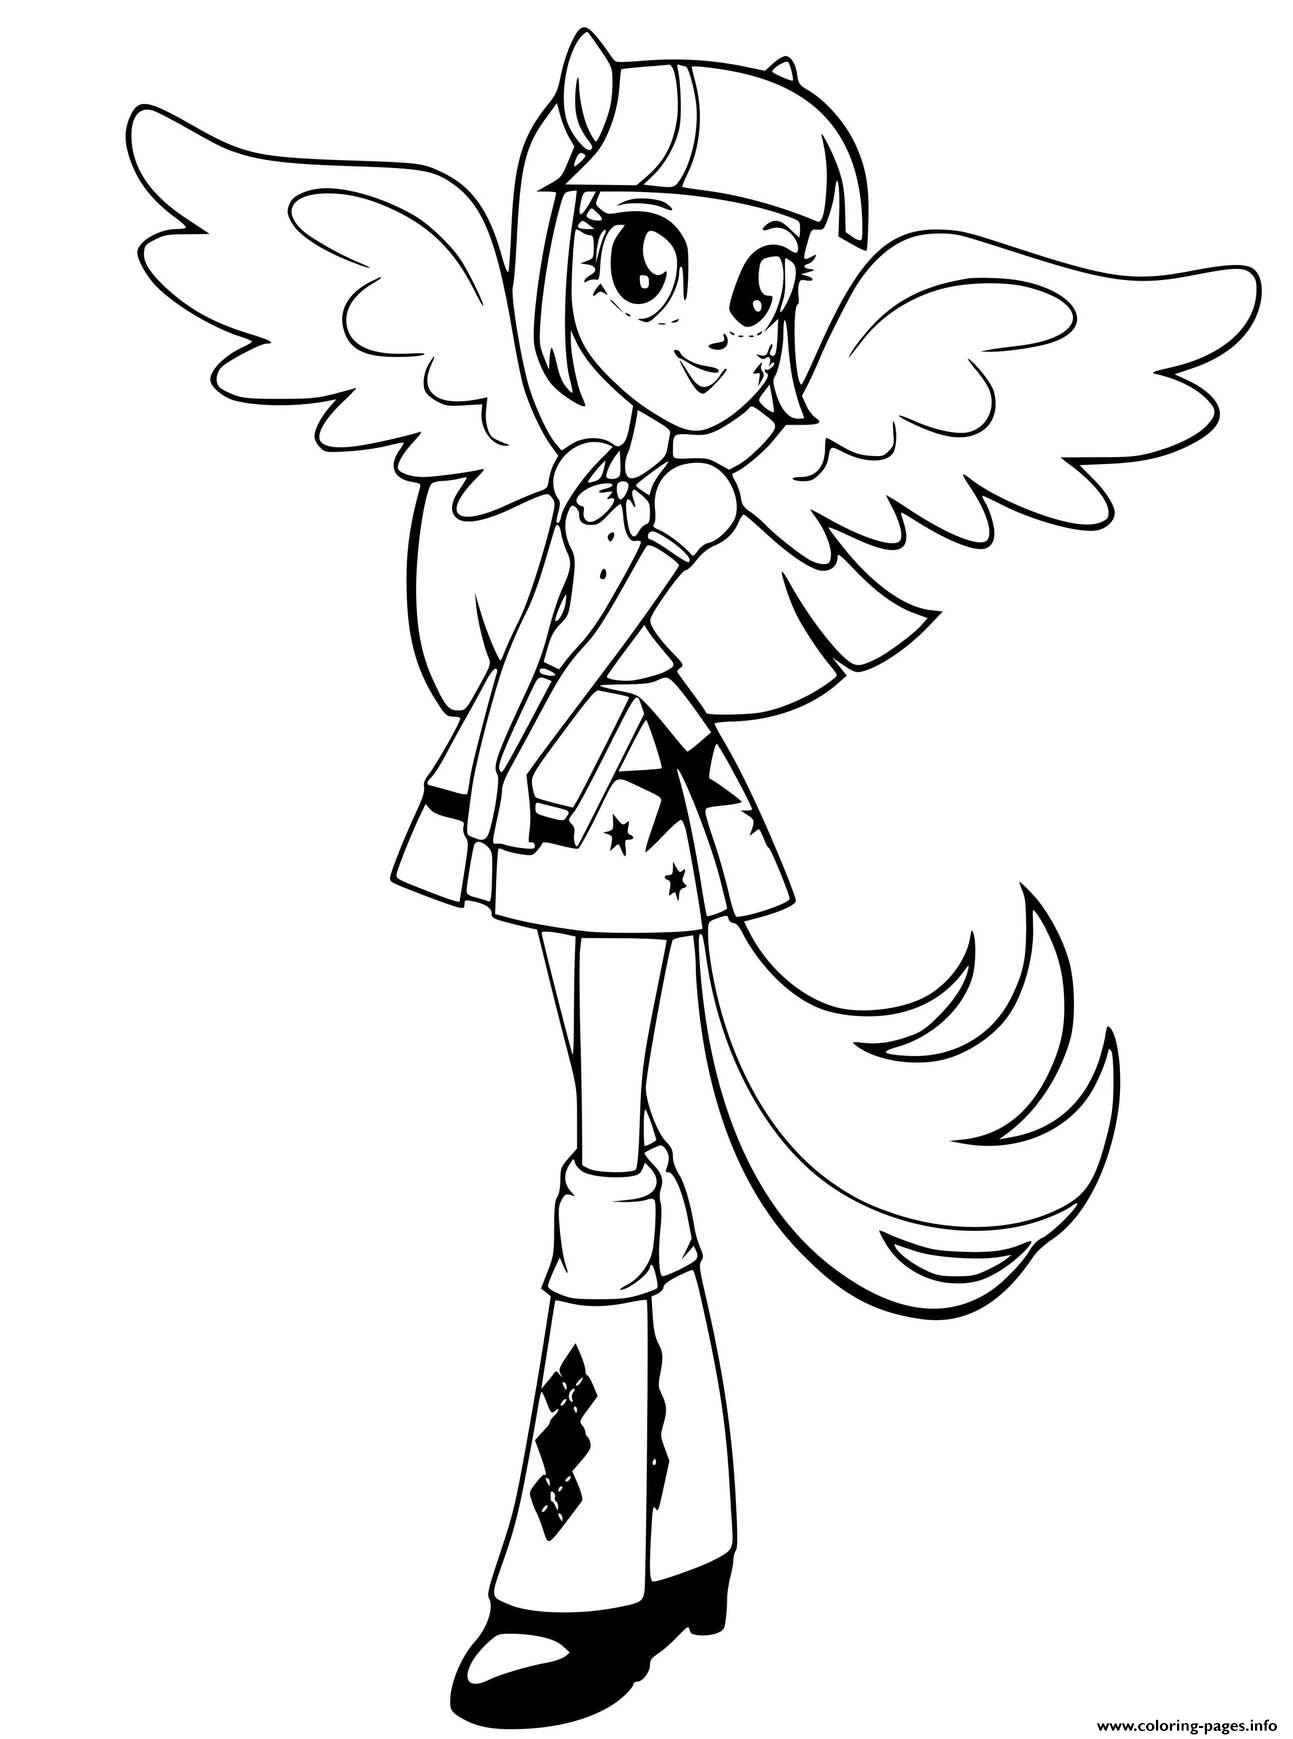 Download Rarity Twilight Sparkle Girl Coloring Pages Printable